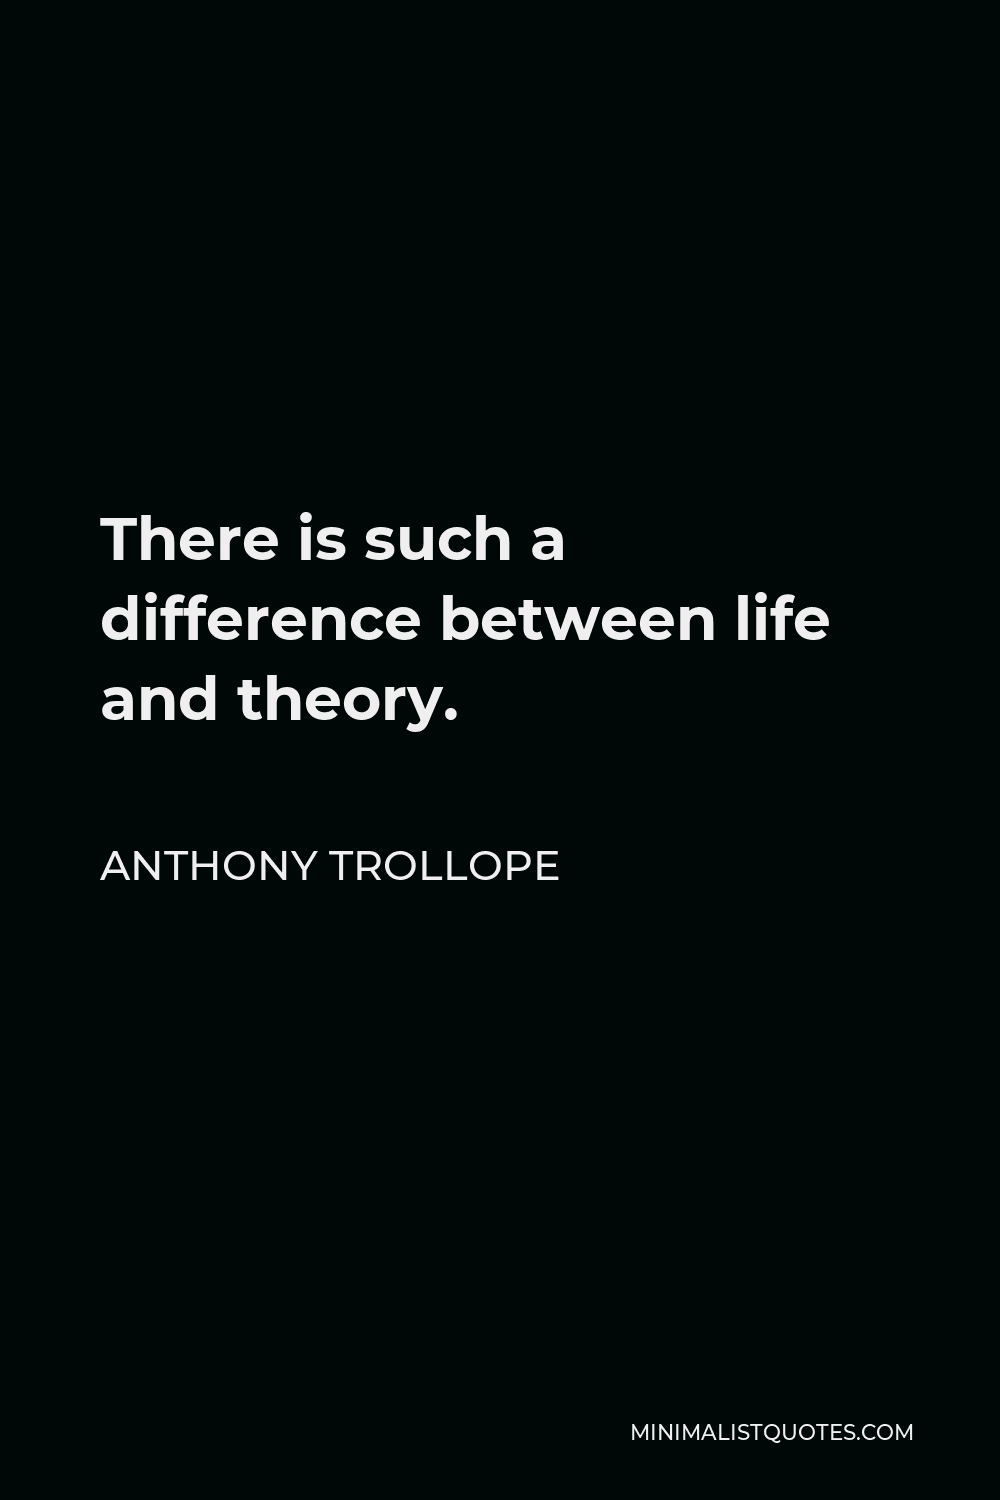 Anthony Trollope Quote - There is such a difference between life and theory.